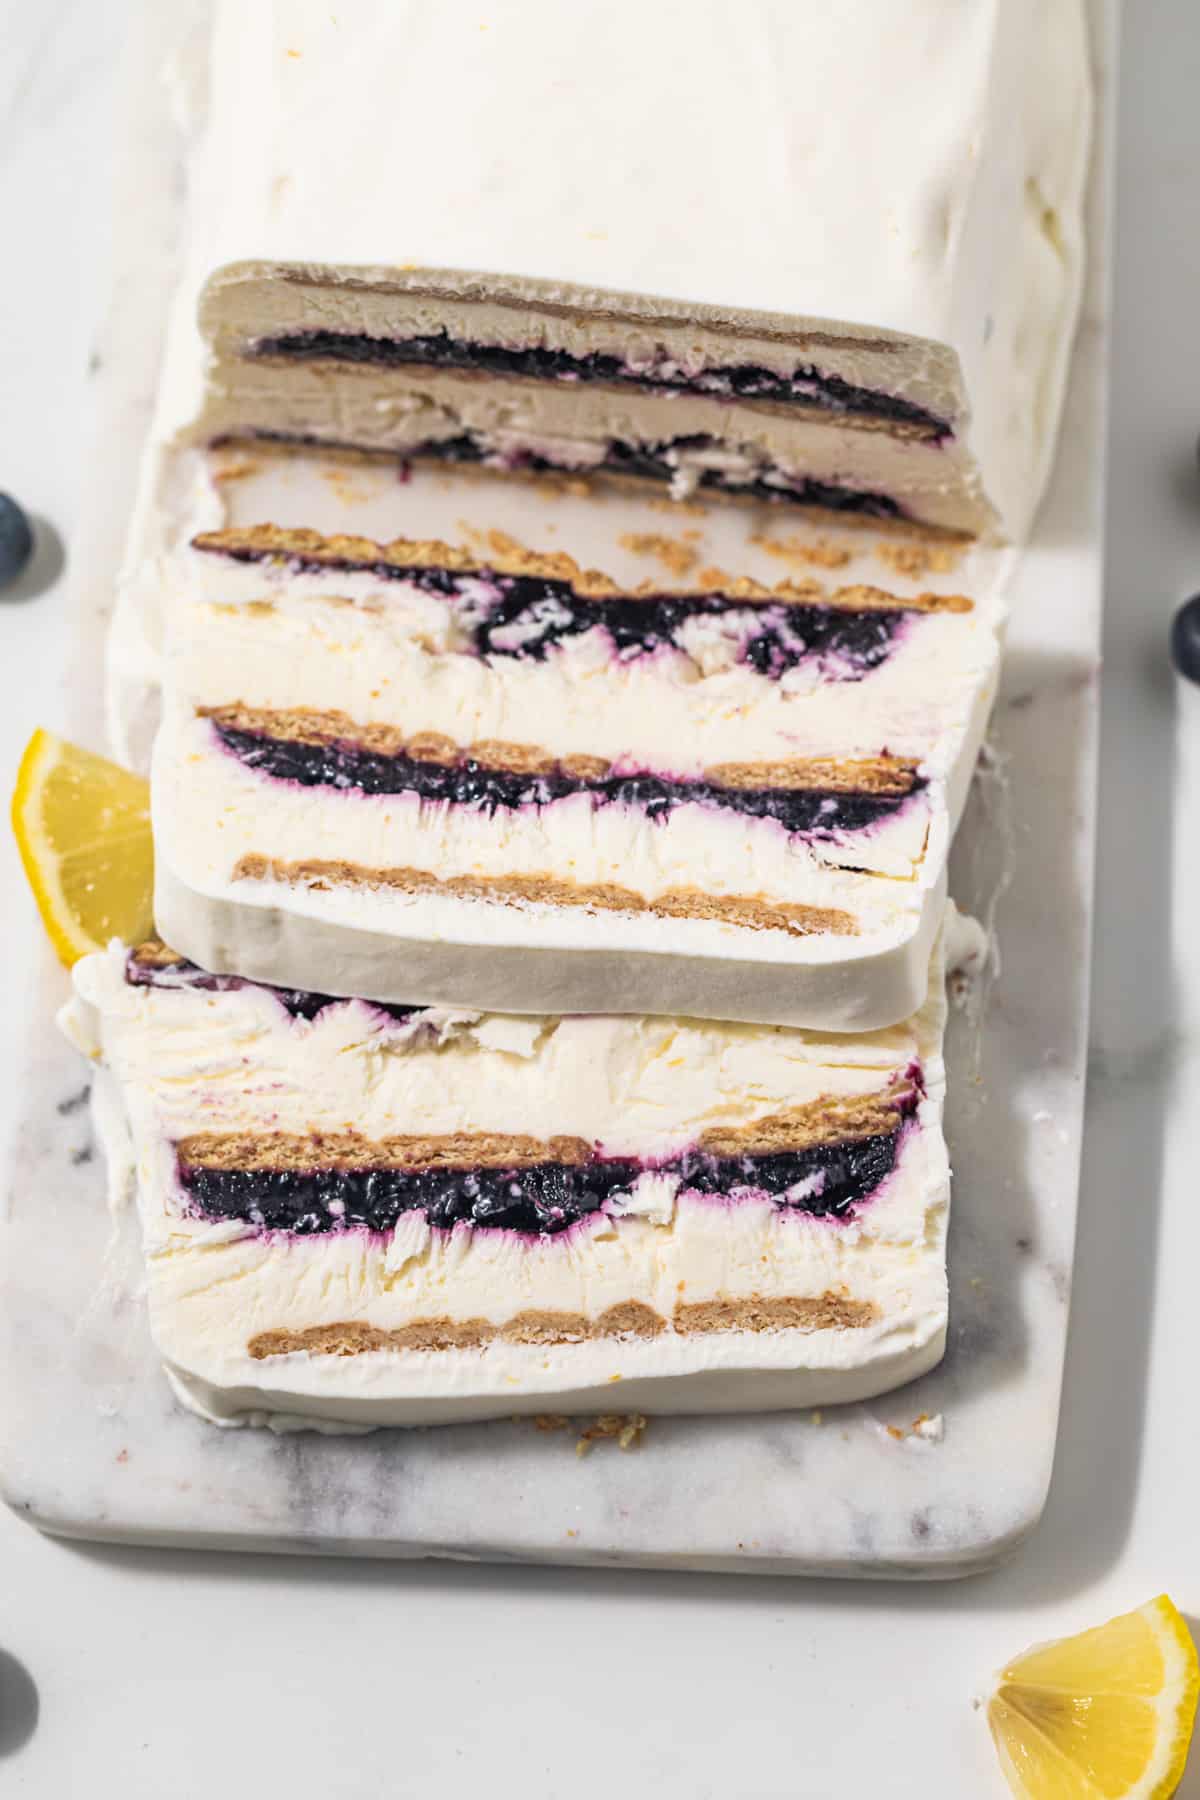 Blueberry lemon icebox cake with slices cut out.